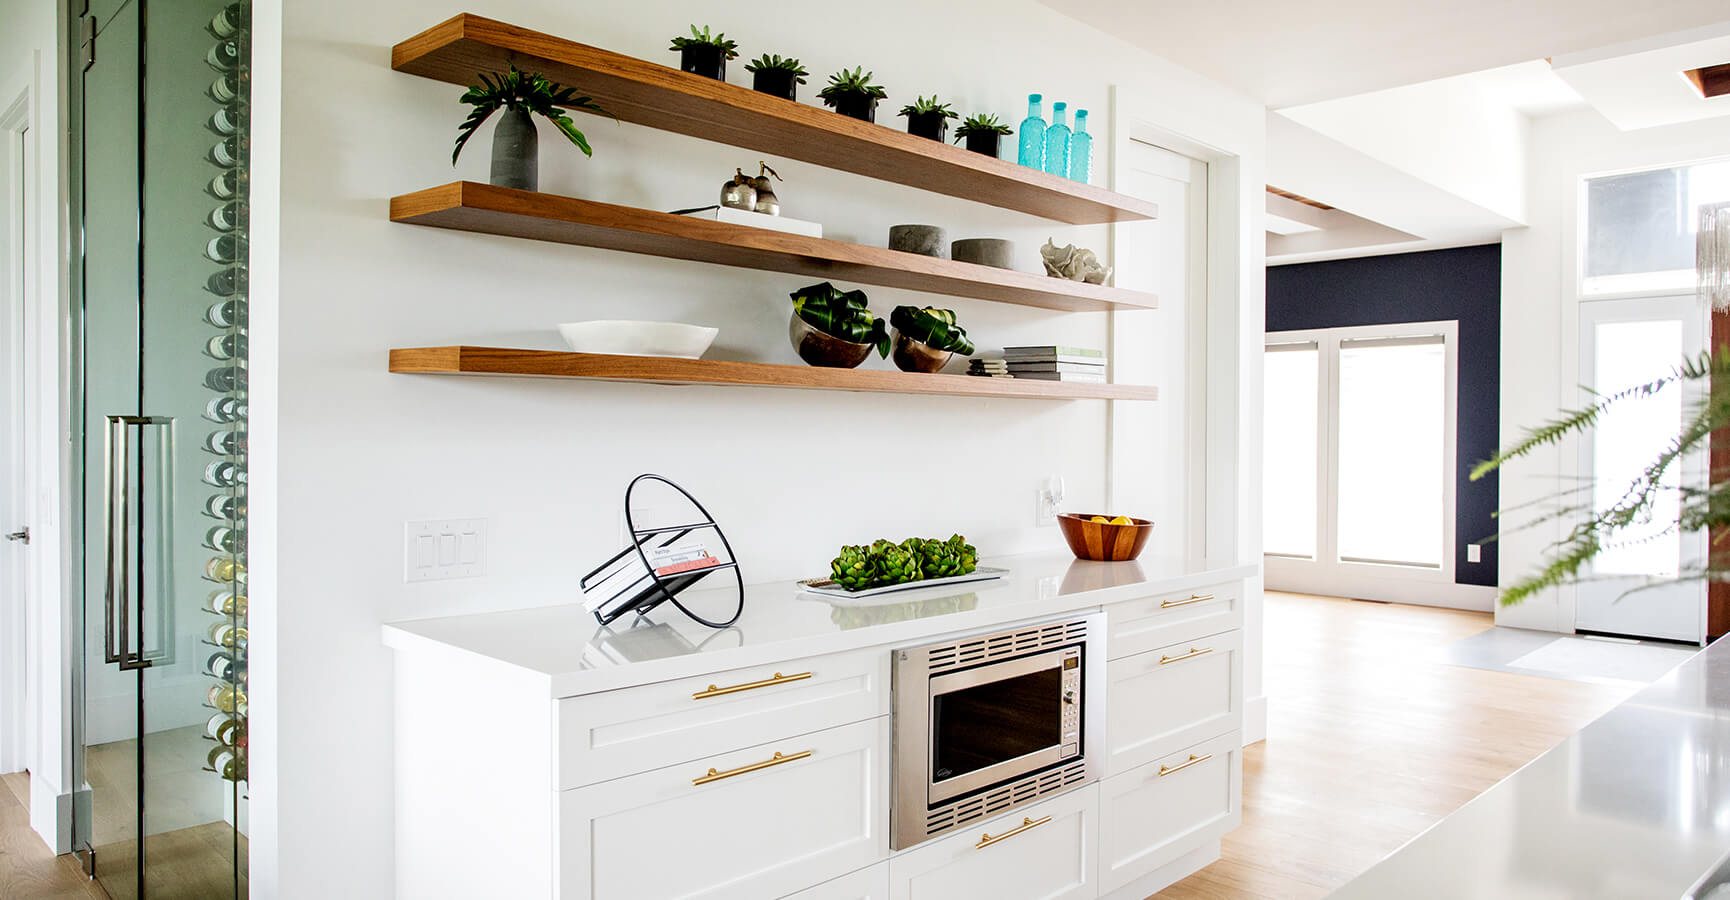 Contemporary Kitchen Design and Shelves